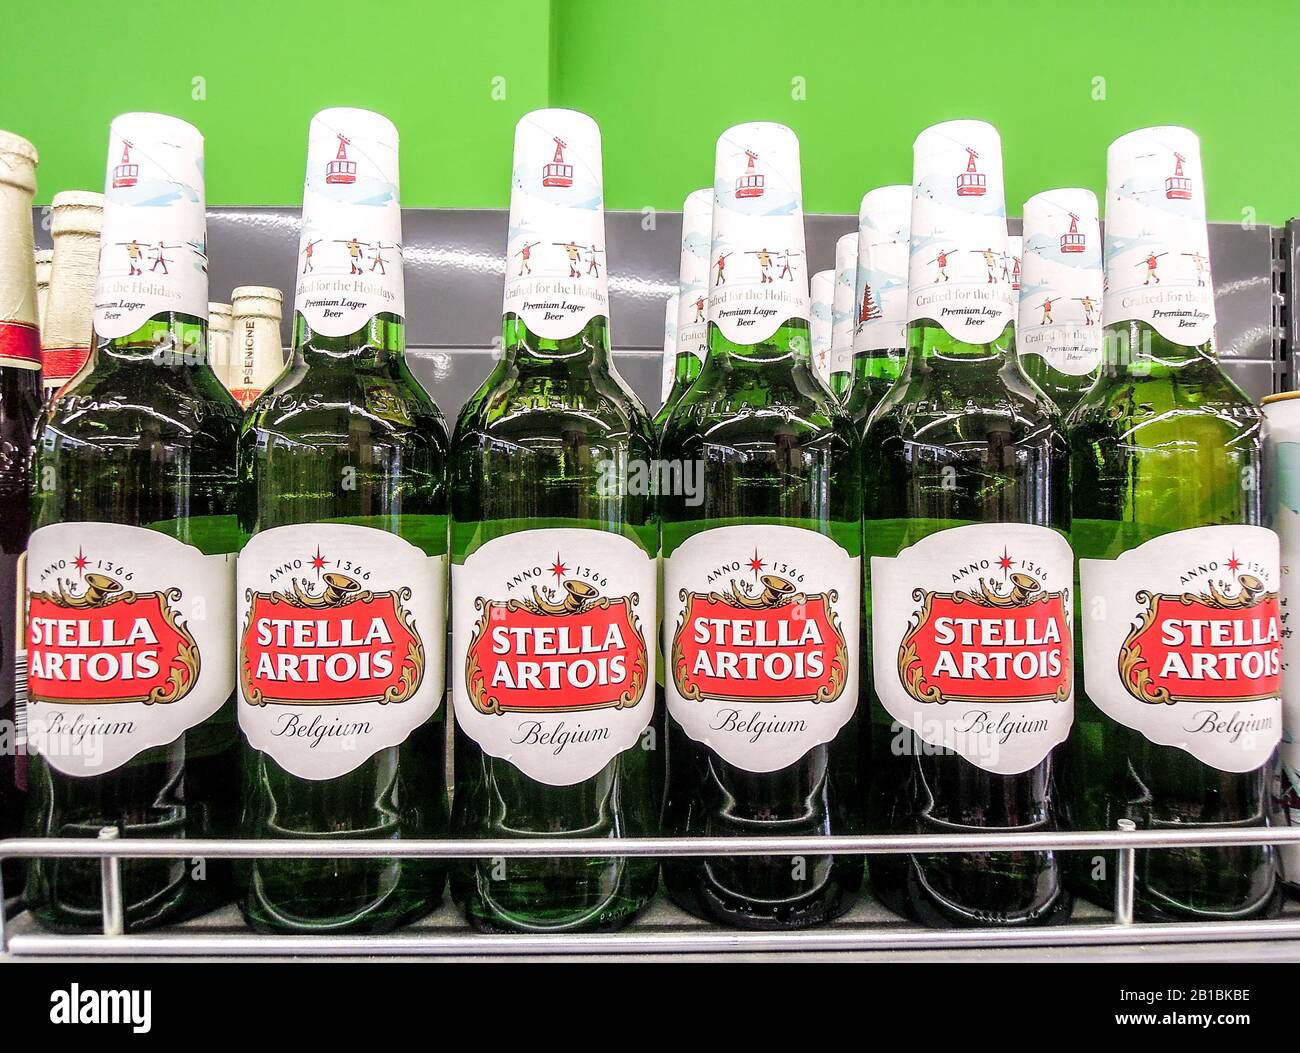 Samara, Russia - February 23, 2020: Stella Artois alcoholic beer ready for sale on the shelf in superstore. Various bottled alcoholic beverages and sp Stock Photo